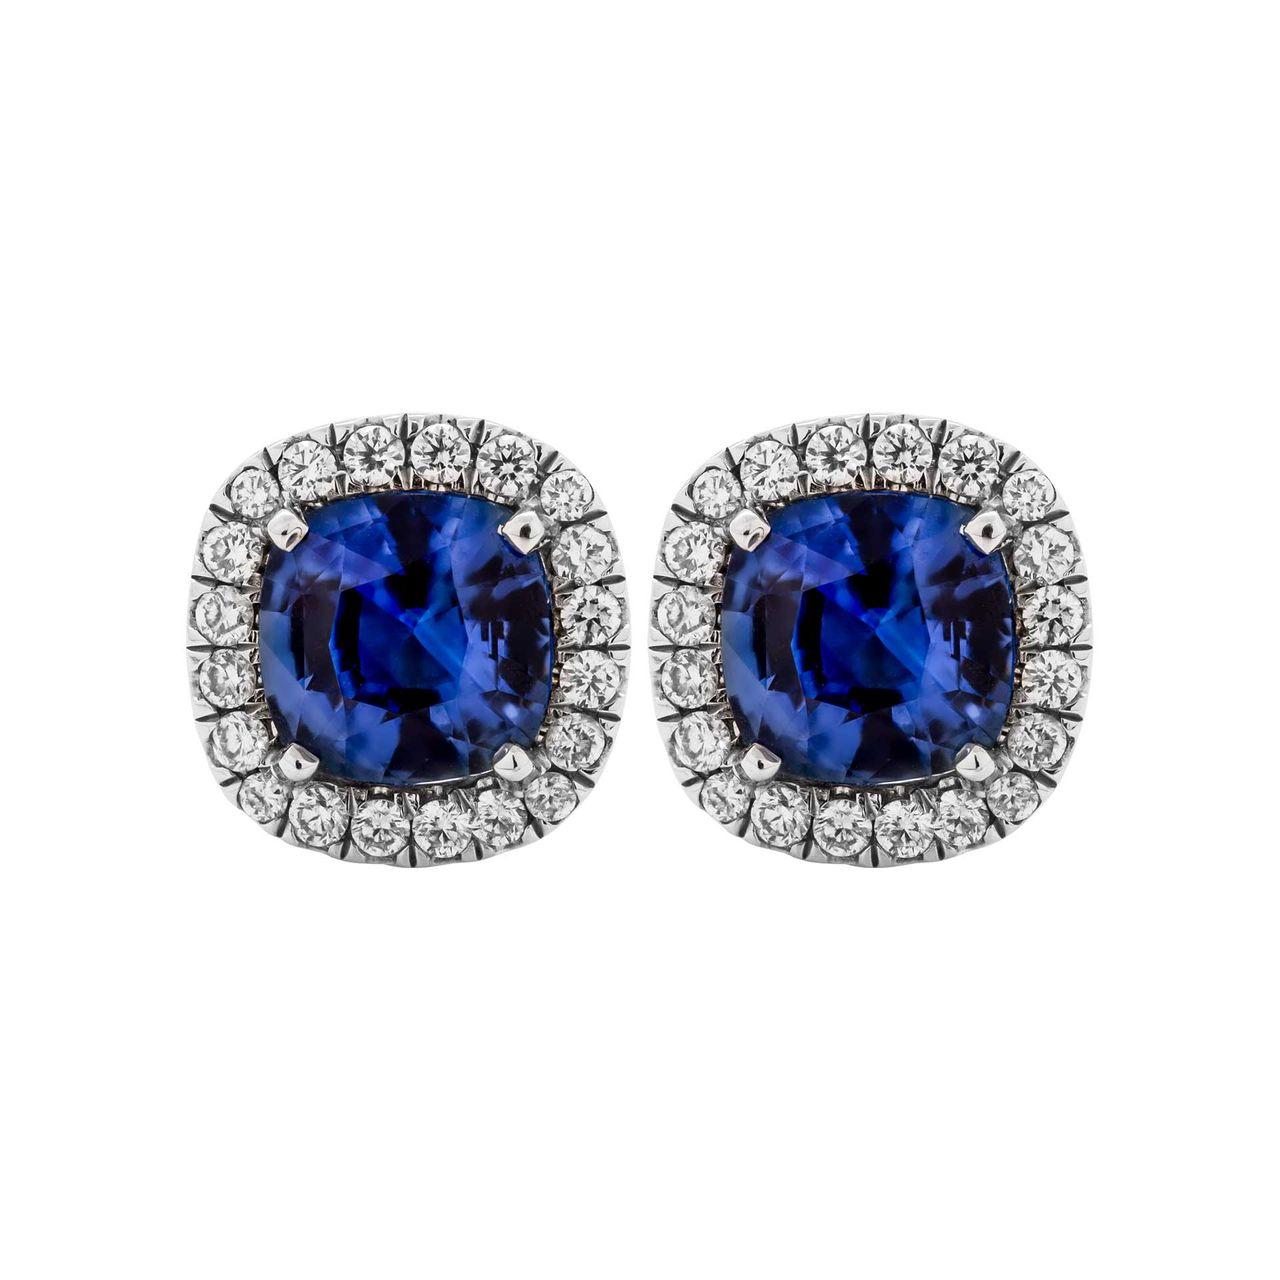 Classic design that is essential addition to any jewelry collection, a true staple! 
Nice and delicate halo around center stone diamonds make stones appear larger, looks like a true 1 carat. 
Each Sapphire 1.06ct 
Total Carat Weight pave: